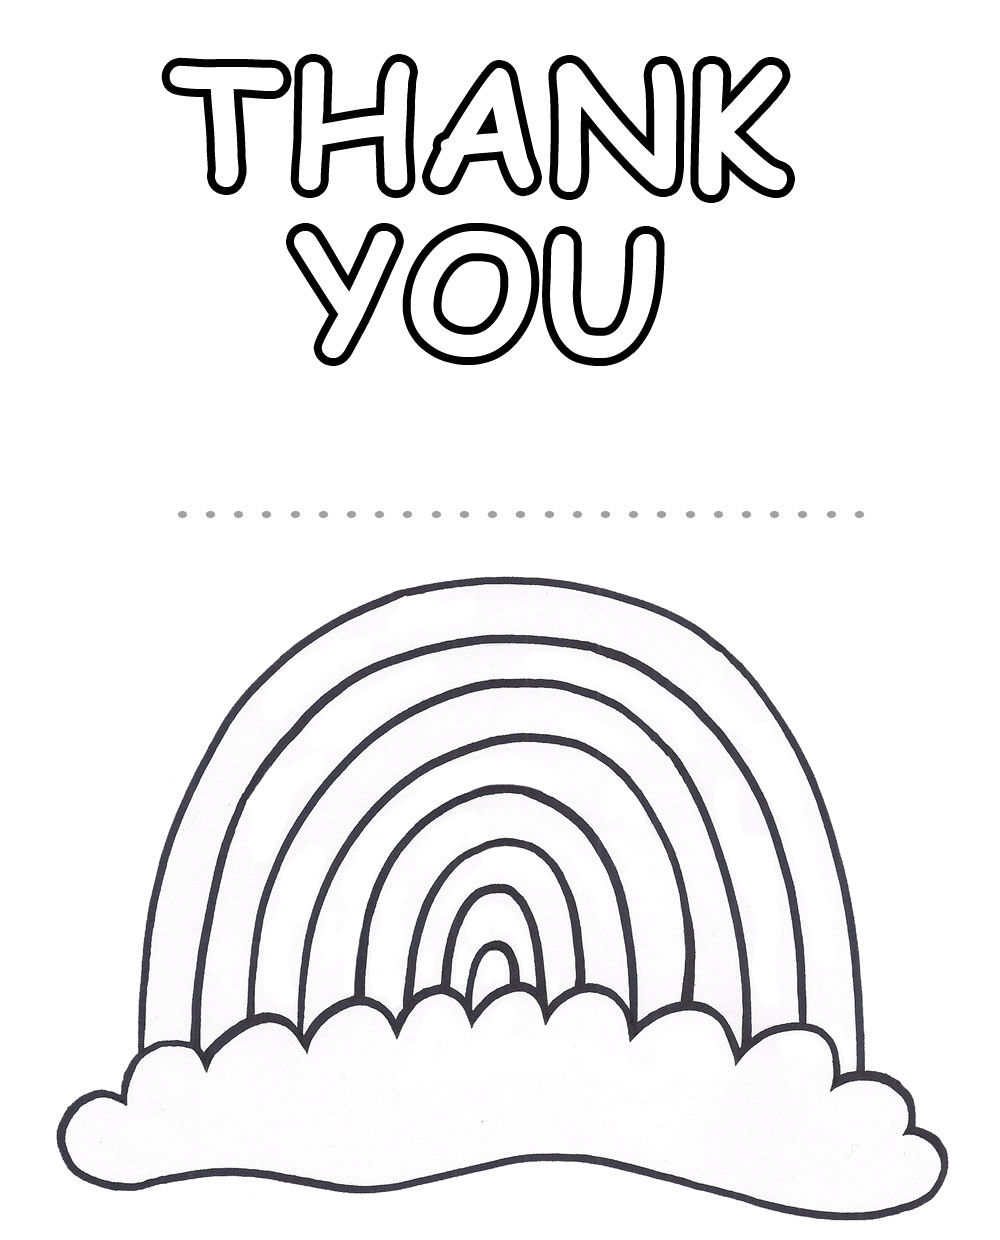 Rainbow Poster to Thank Whoever You Like | Rooftop Post Printables